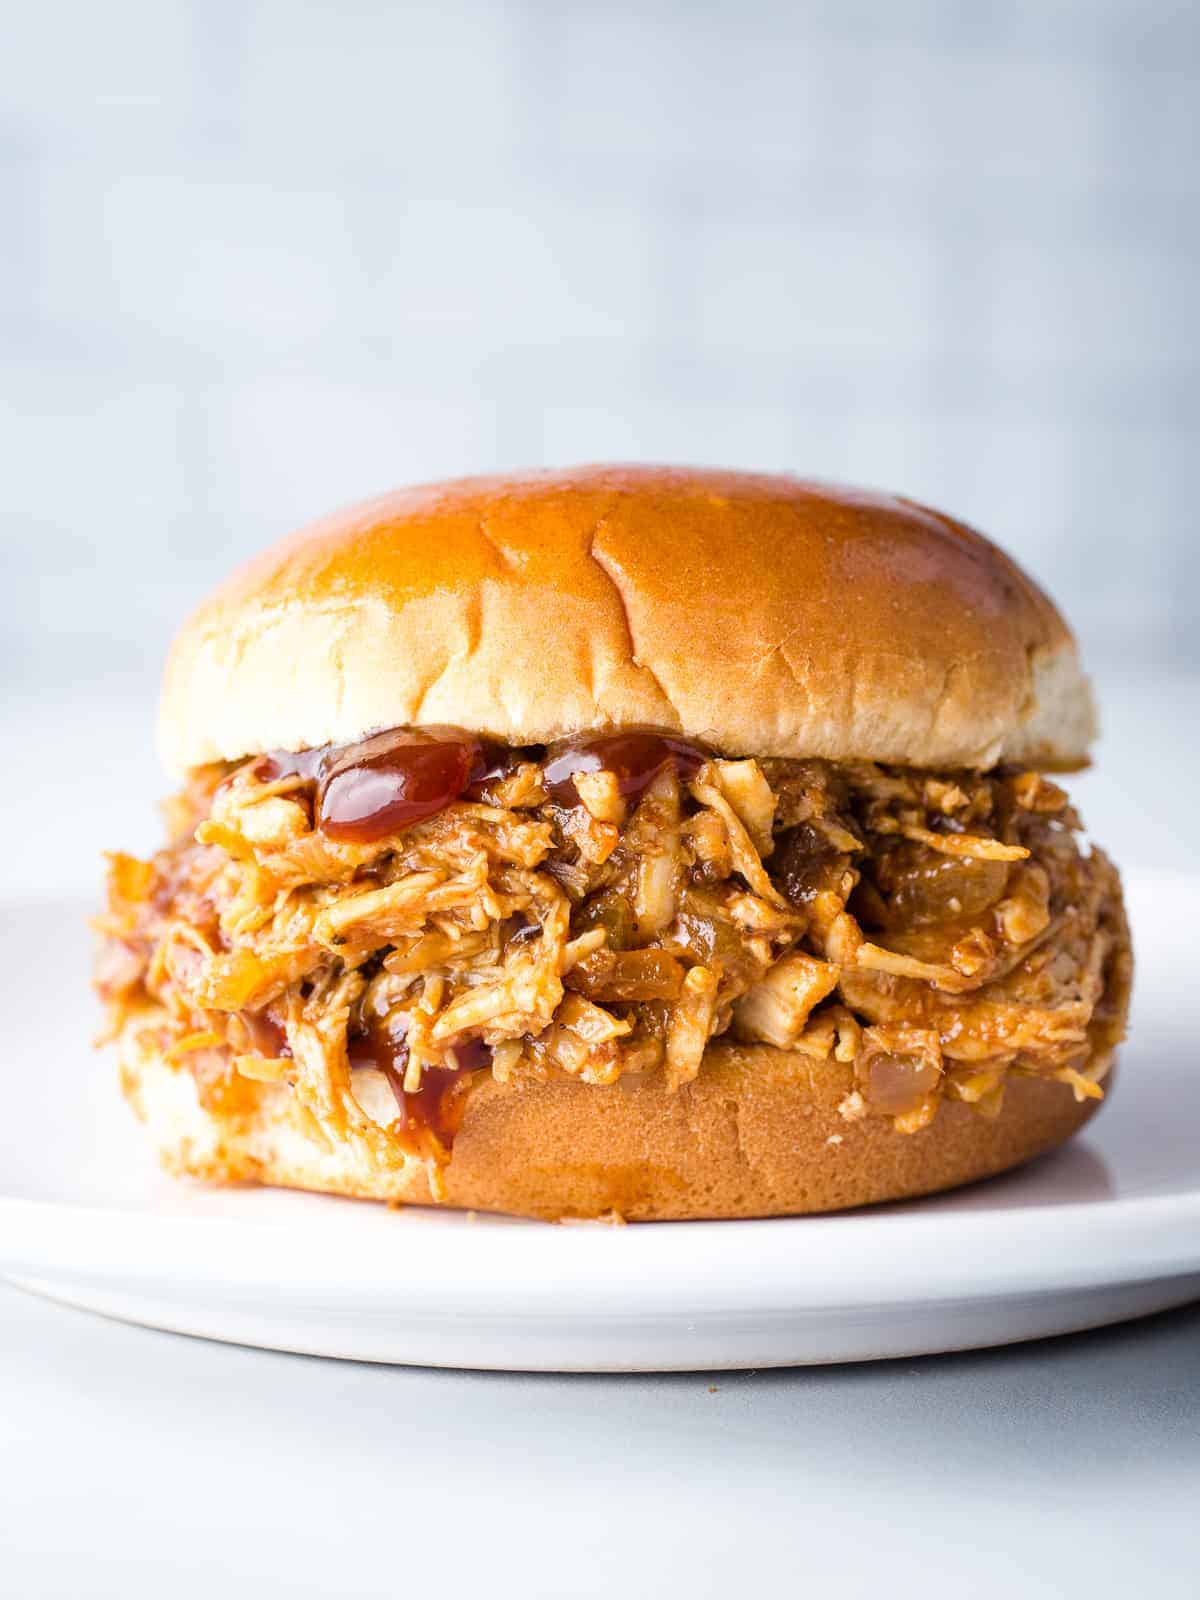 Pulled chicken sandwich on a bun served on a white plate.